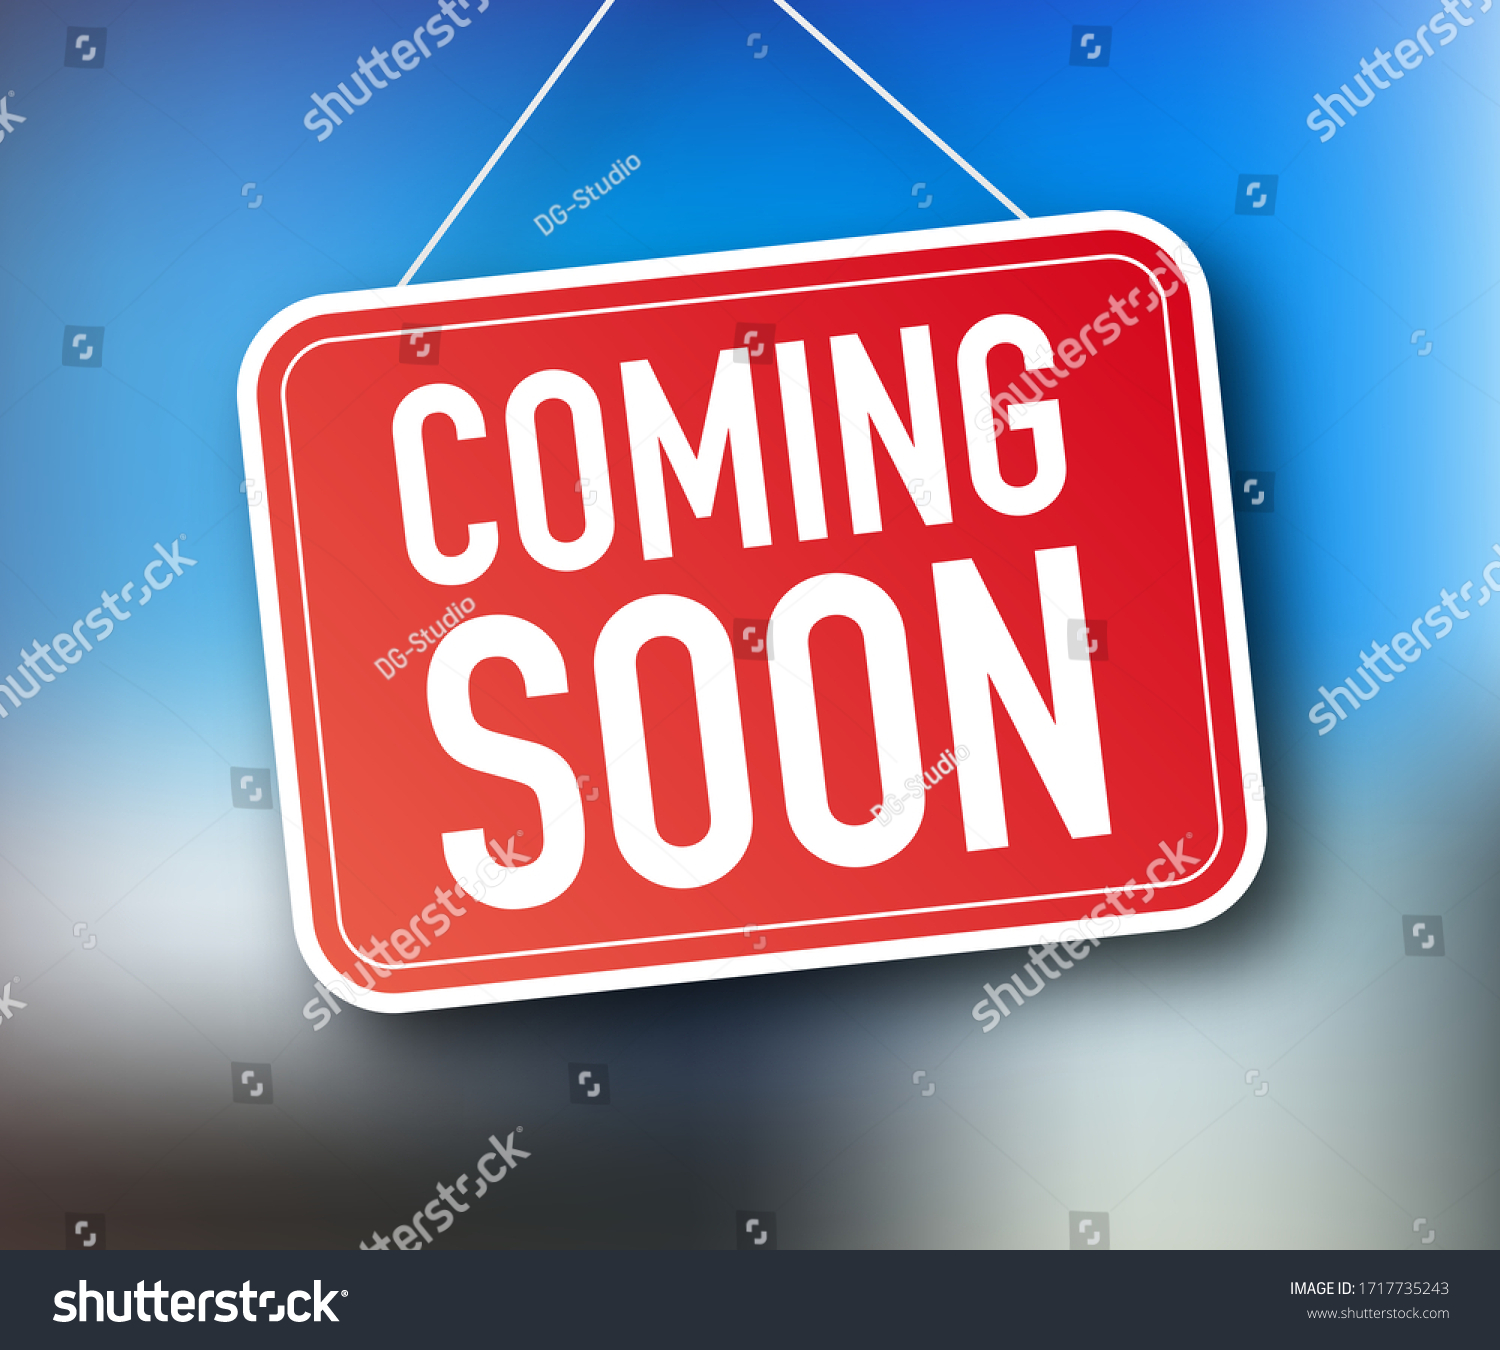 Coming soon hanging sign on white background. Sign for door. Vector stock illustration. #1717735243